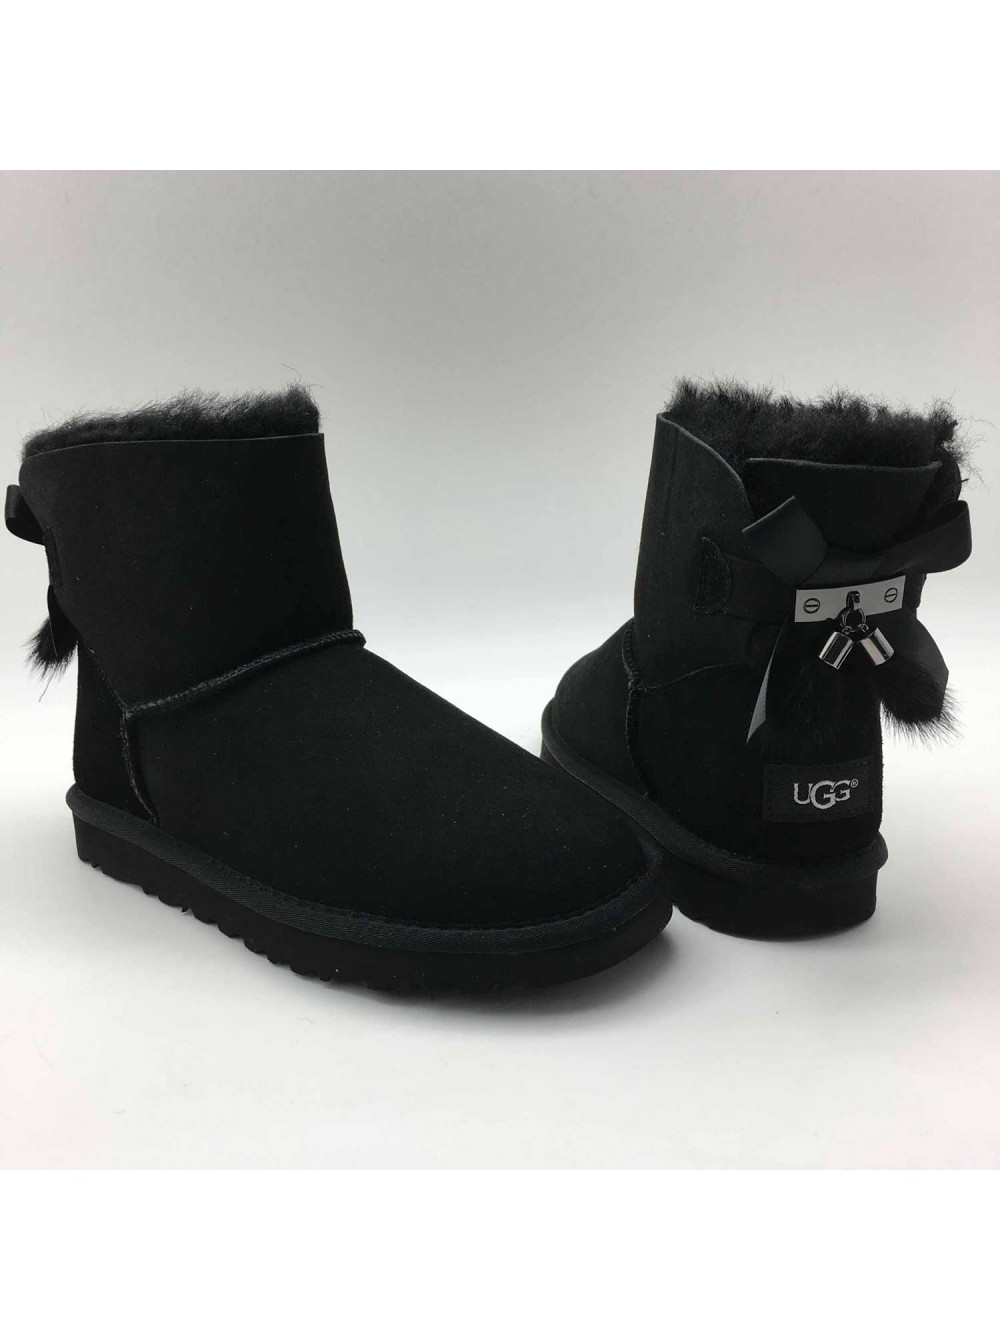 black and white bailey bow uggs